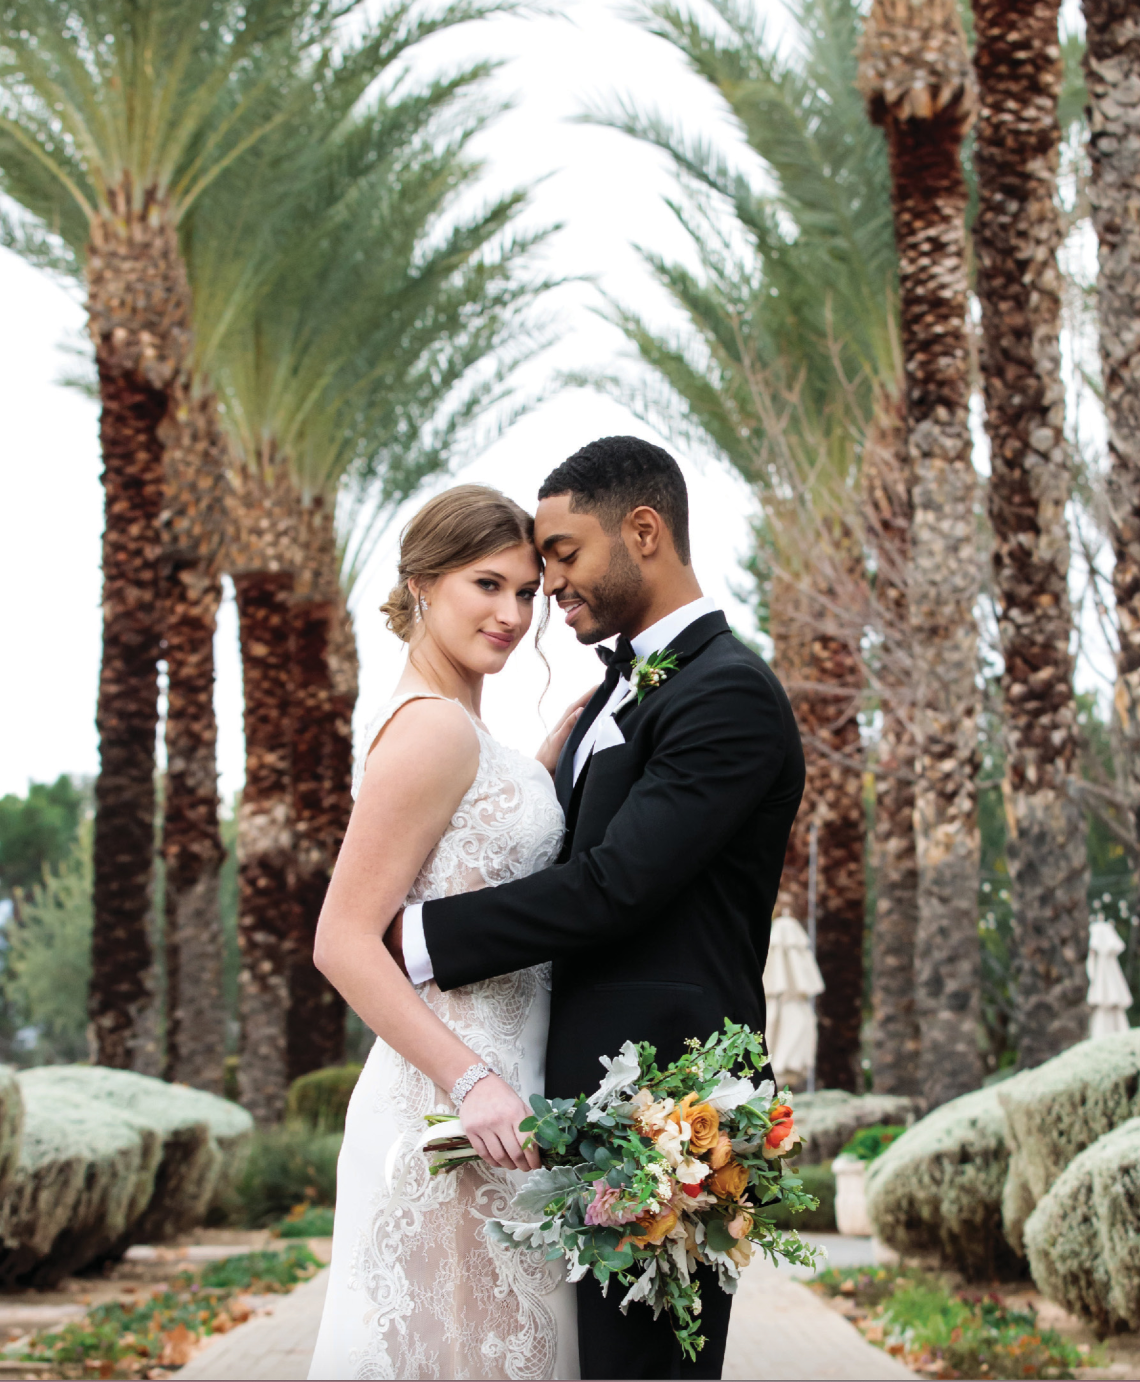 Bride holding floral bouquet and embracing groom in elegant black tux on a walkway lined with tall palm trees at a Tucson Wedding venue. 